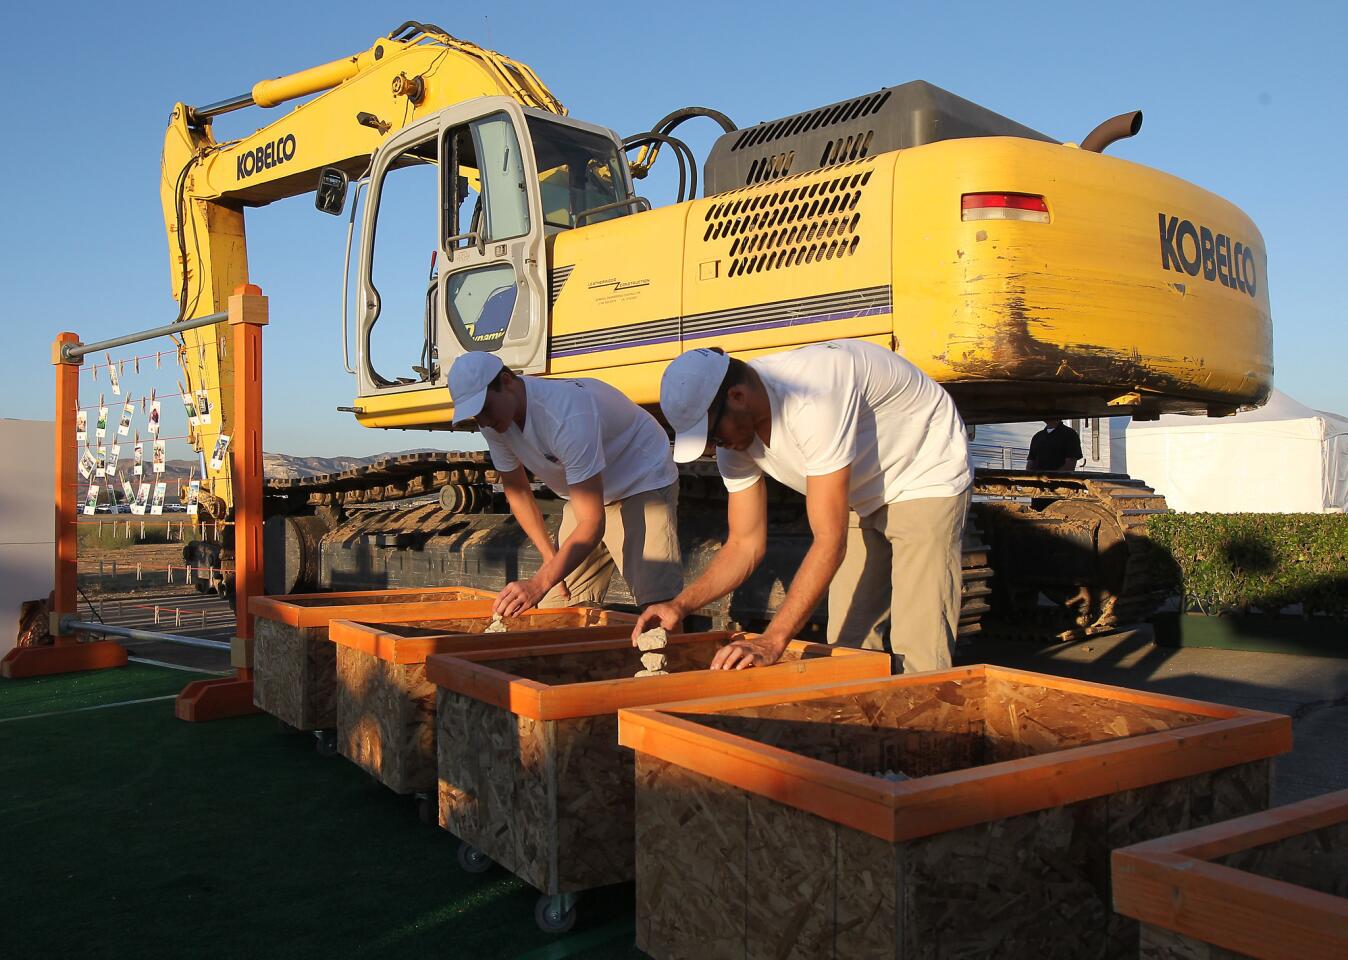 Volunteers organize pieces of the runways' concrete that were given away as mementos during the city of Irvine and FivePoint Communities ceremonial breaking of the concrete runways of the old El Toro Marine Base to make way for the Great Park Neighborhoods and parks.